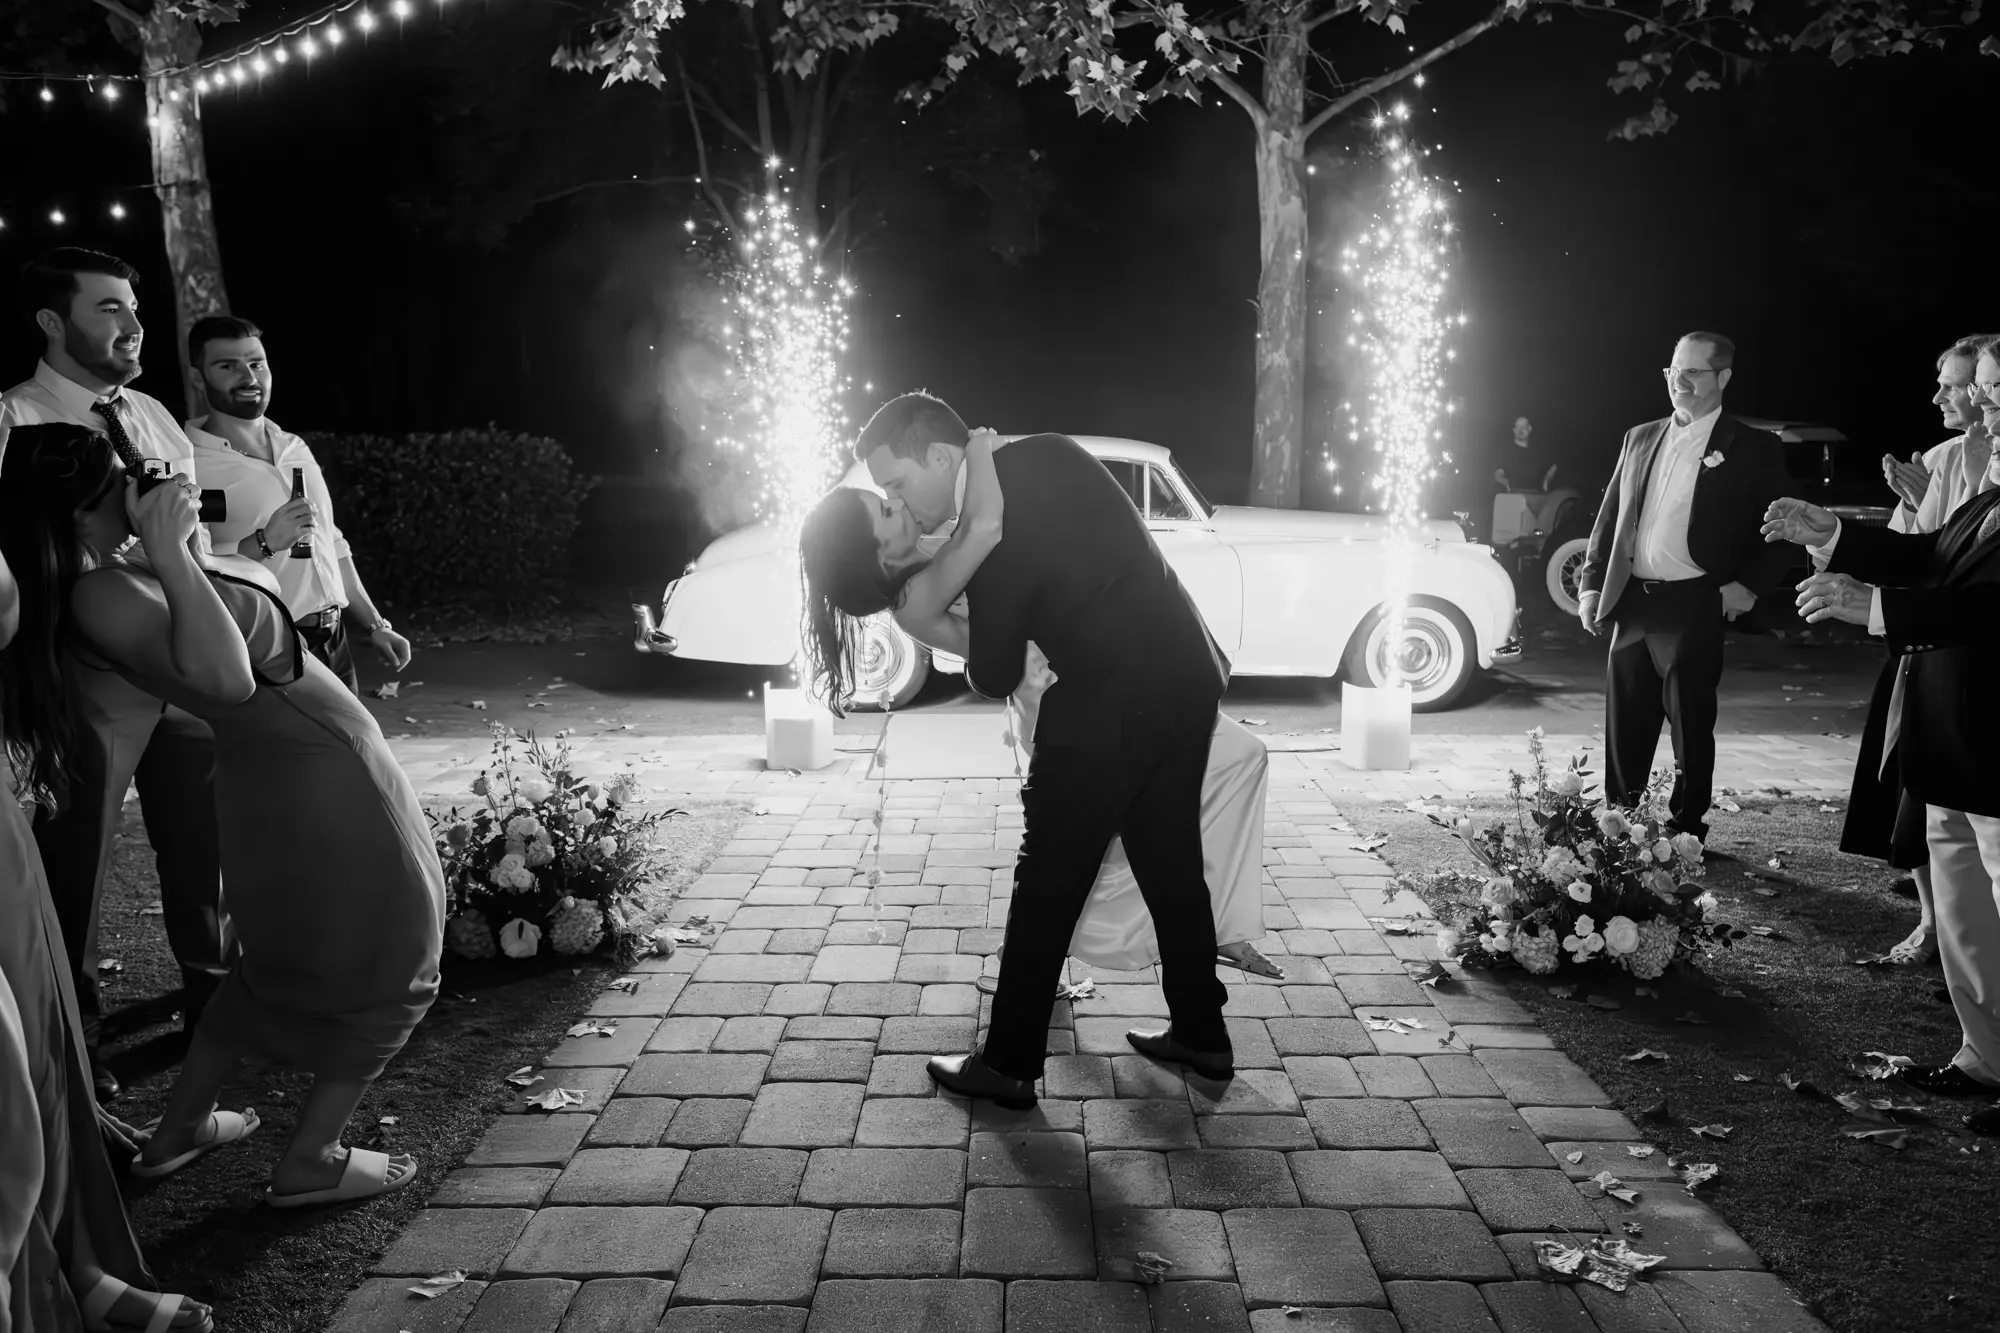 Bride and Groom Cold Spark Wedding Reception Grand Exit with Classic White Getaway Car Ideas | Tampa Bay Event Planner Coastal Coordinating